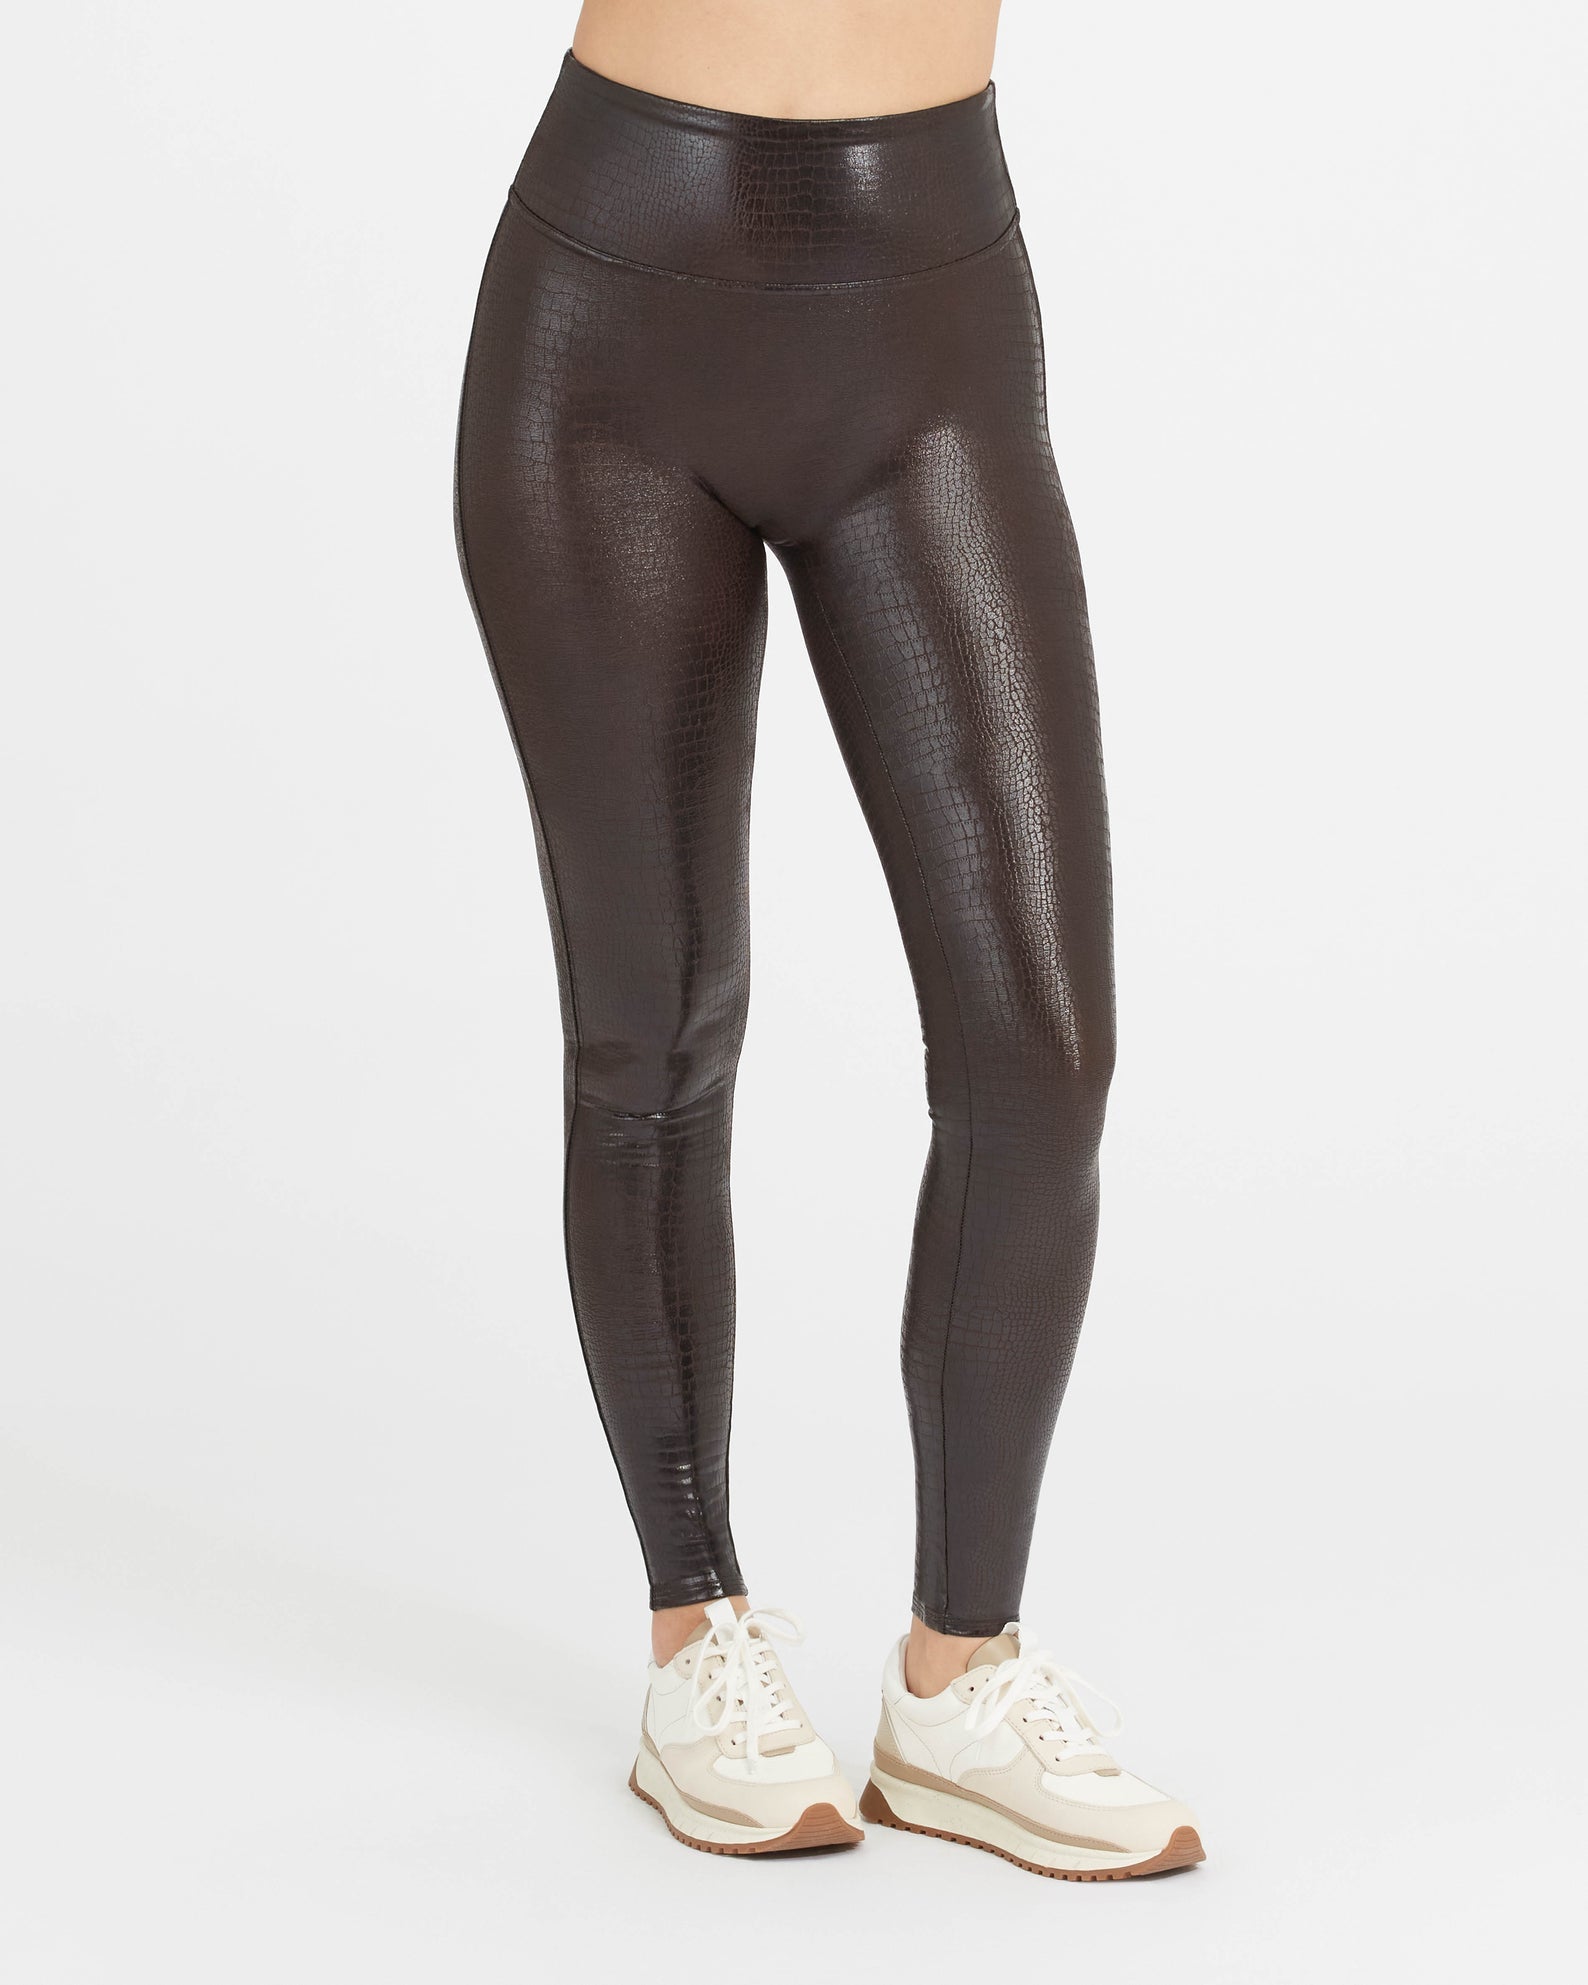 SPANX - CROC SHINE! Everyone's favorite Faux Leather Leggings are now in  limited edition Croc Shine! With a brown/black glossy, shine finish, these  leggings add style and chicness to your Fall looks. #